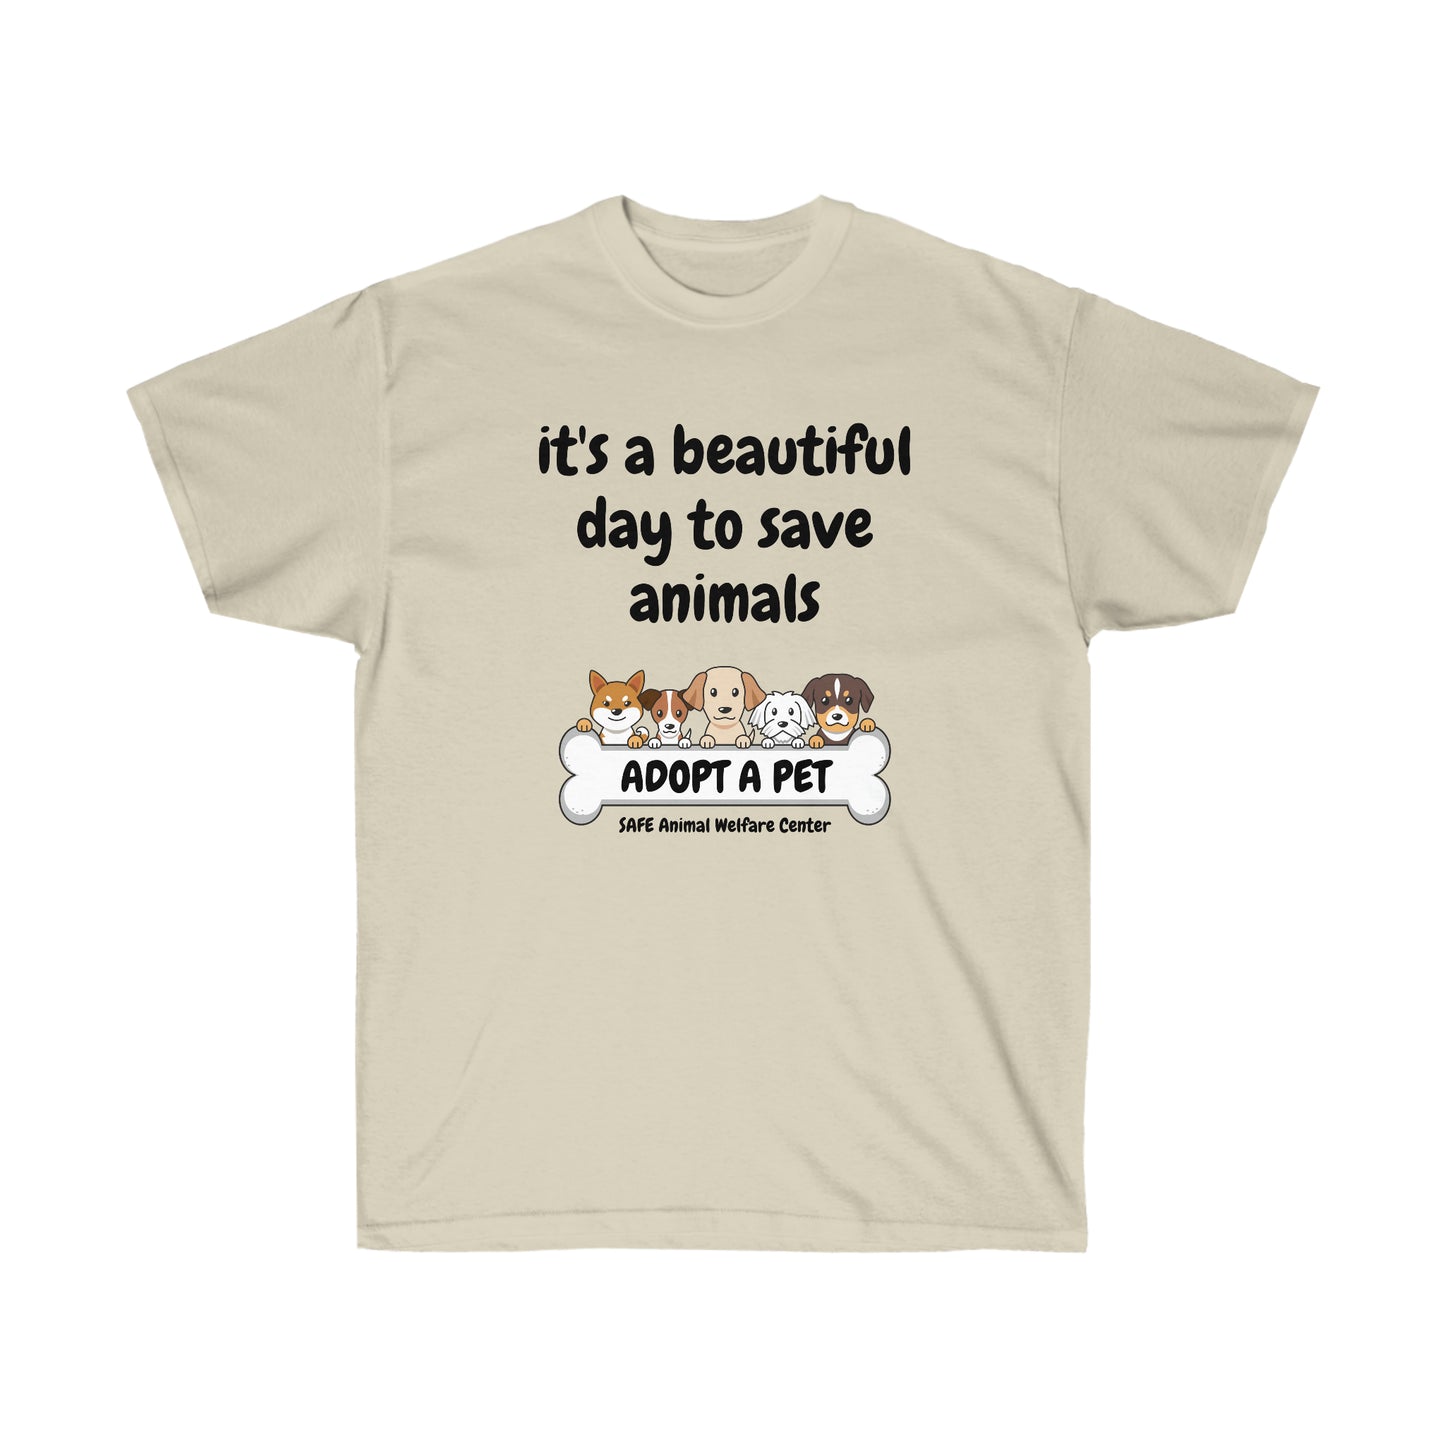 It's a beautiful day to save animals Unisex Ultra Cotton Tee